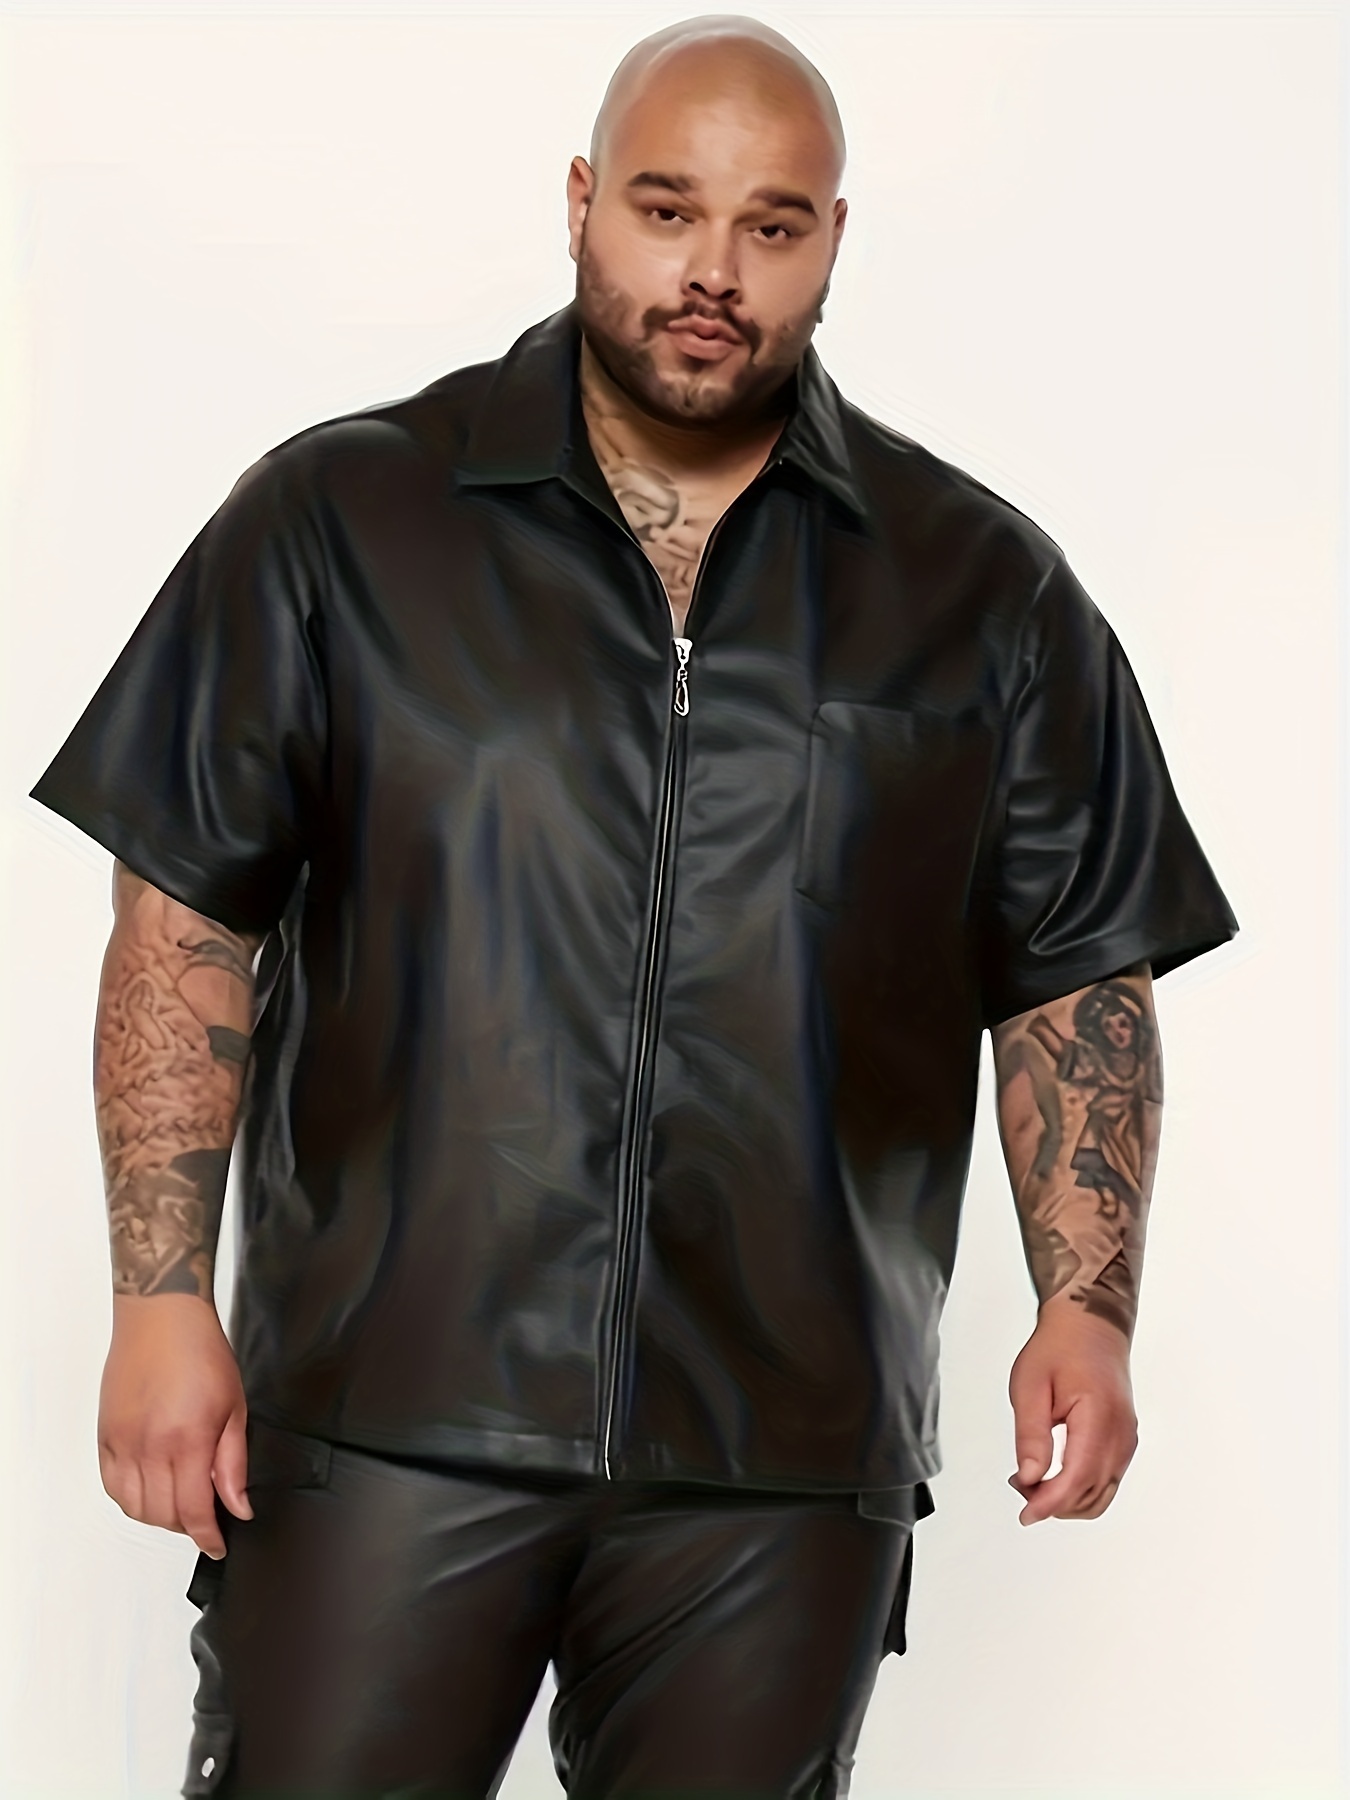 Plus Size Men's Handsome PU Jacket Oversized Short Sleeve Shirt For Big &  Tall Males, Men's Clothing